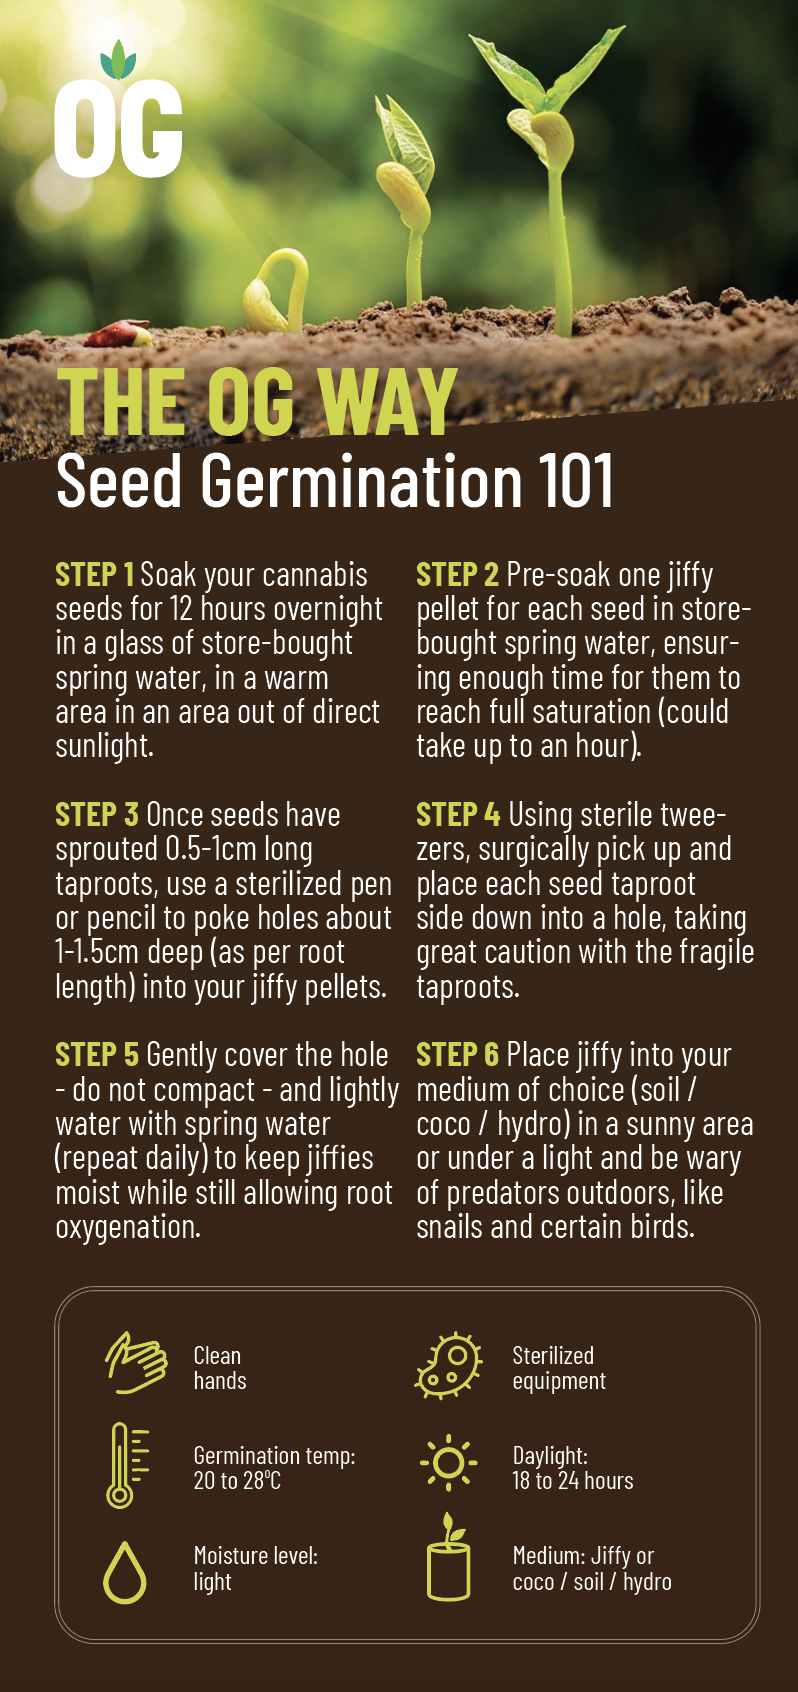 Infographic depicting 6 steps to successful cannabis seed germination.